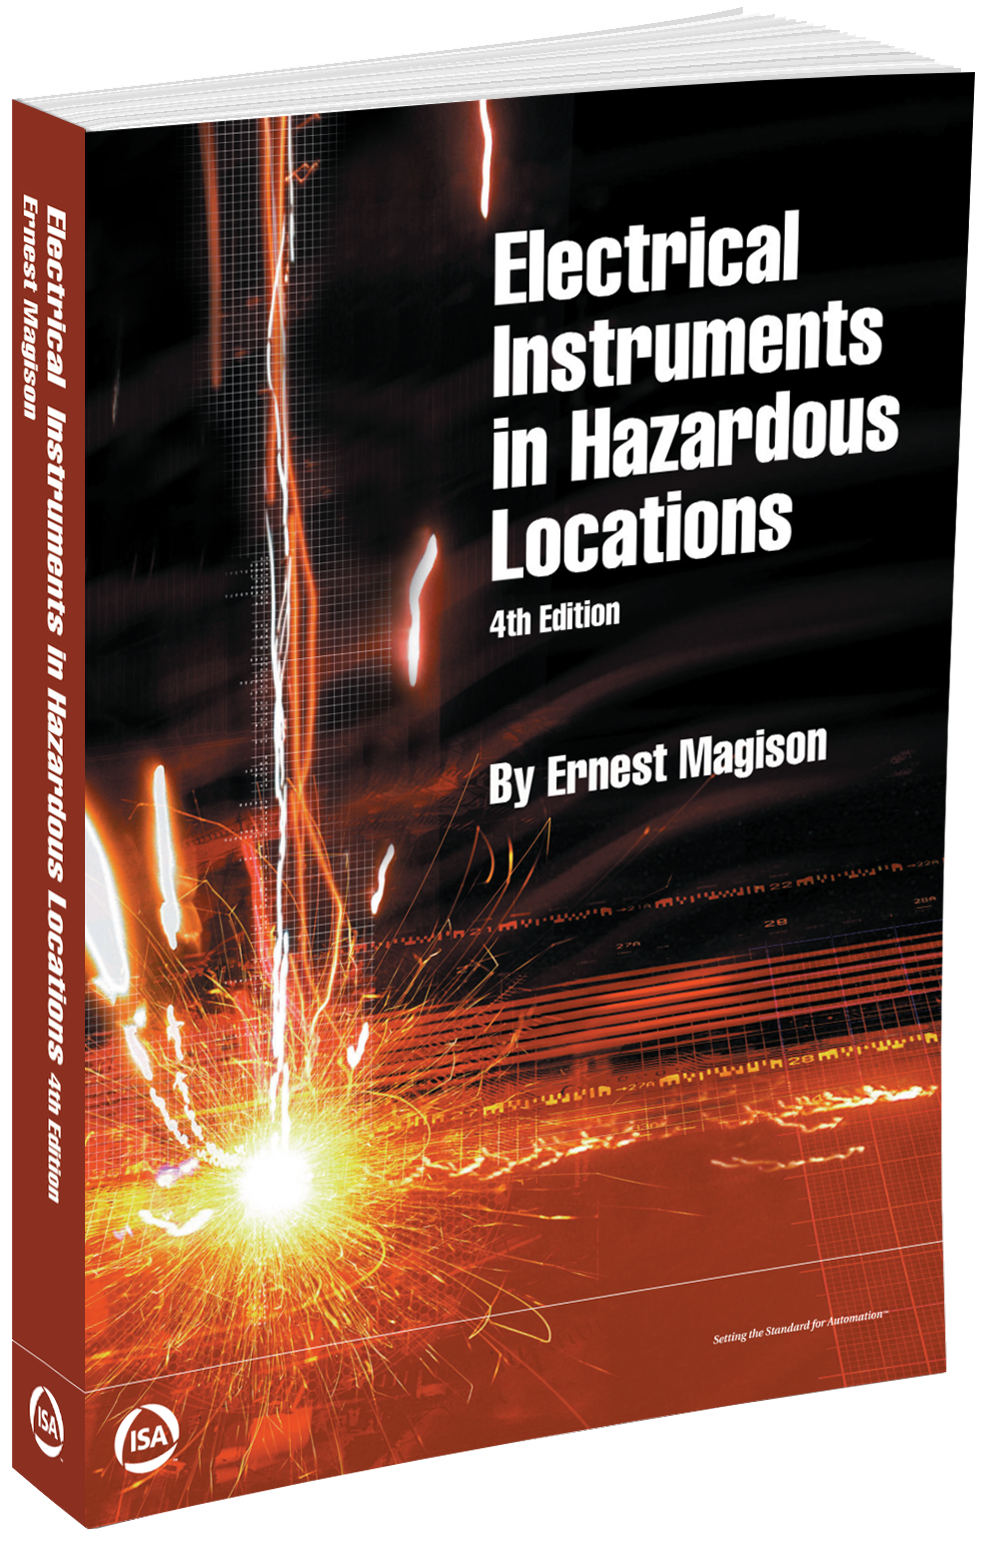 Electrical Instruments in Hazardous locations cover 3D